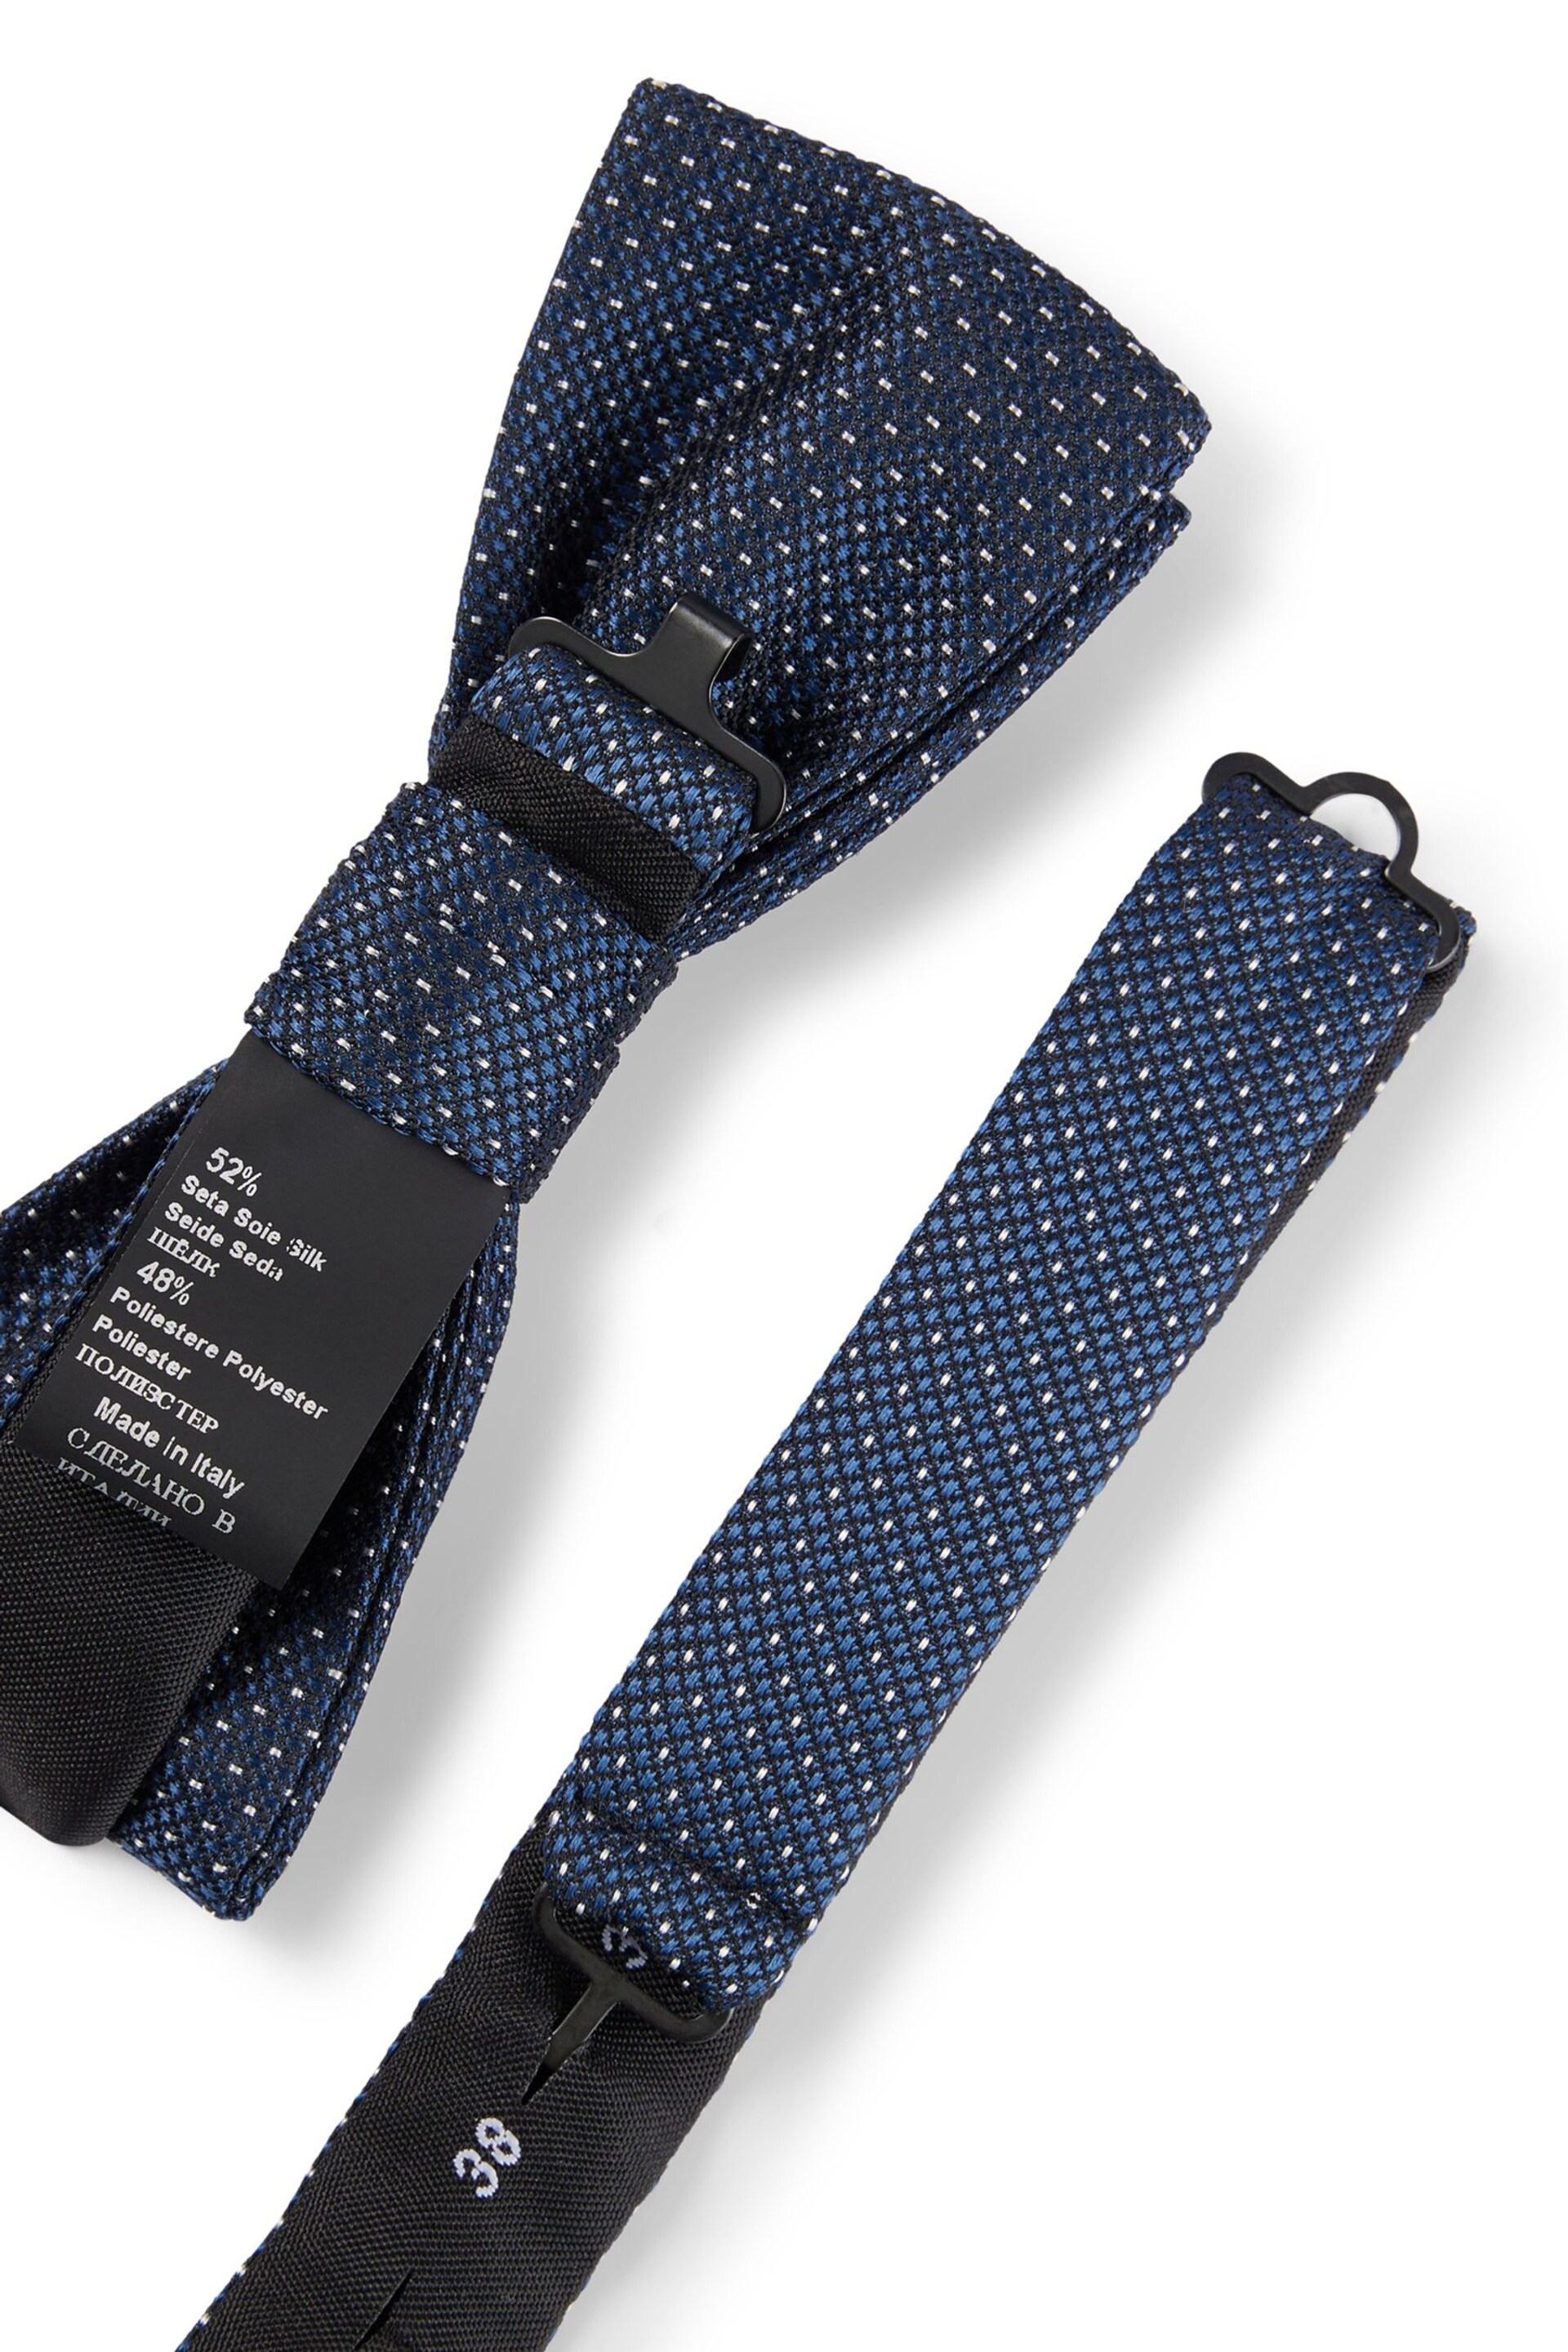 BOSS Blue Silk-Blend Jacquard Bow Tie and Pocket Square - Image 2 of 3